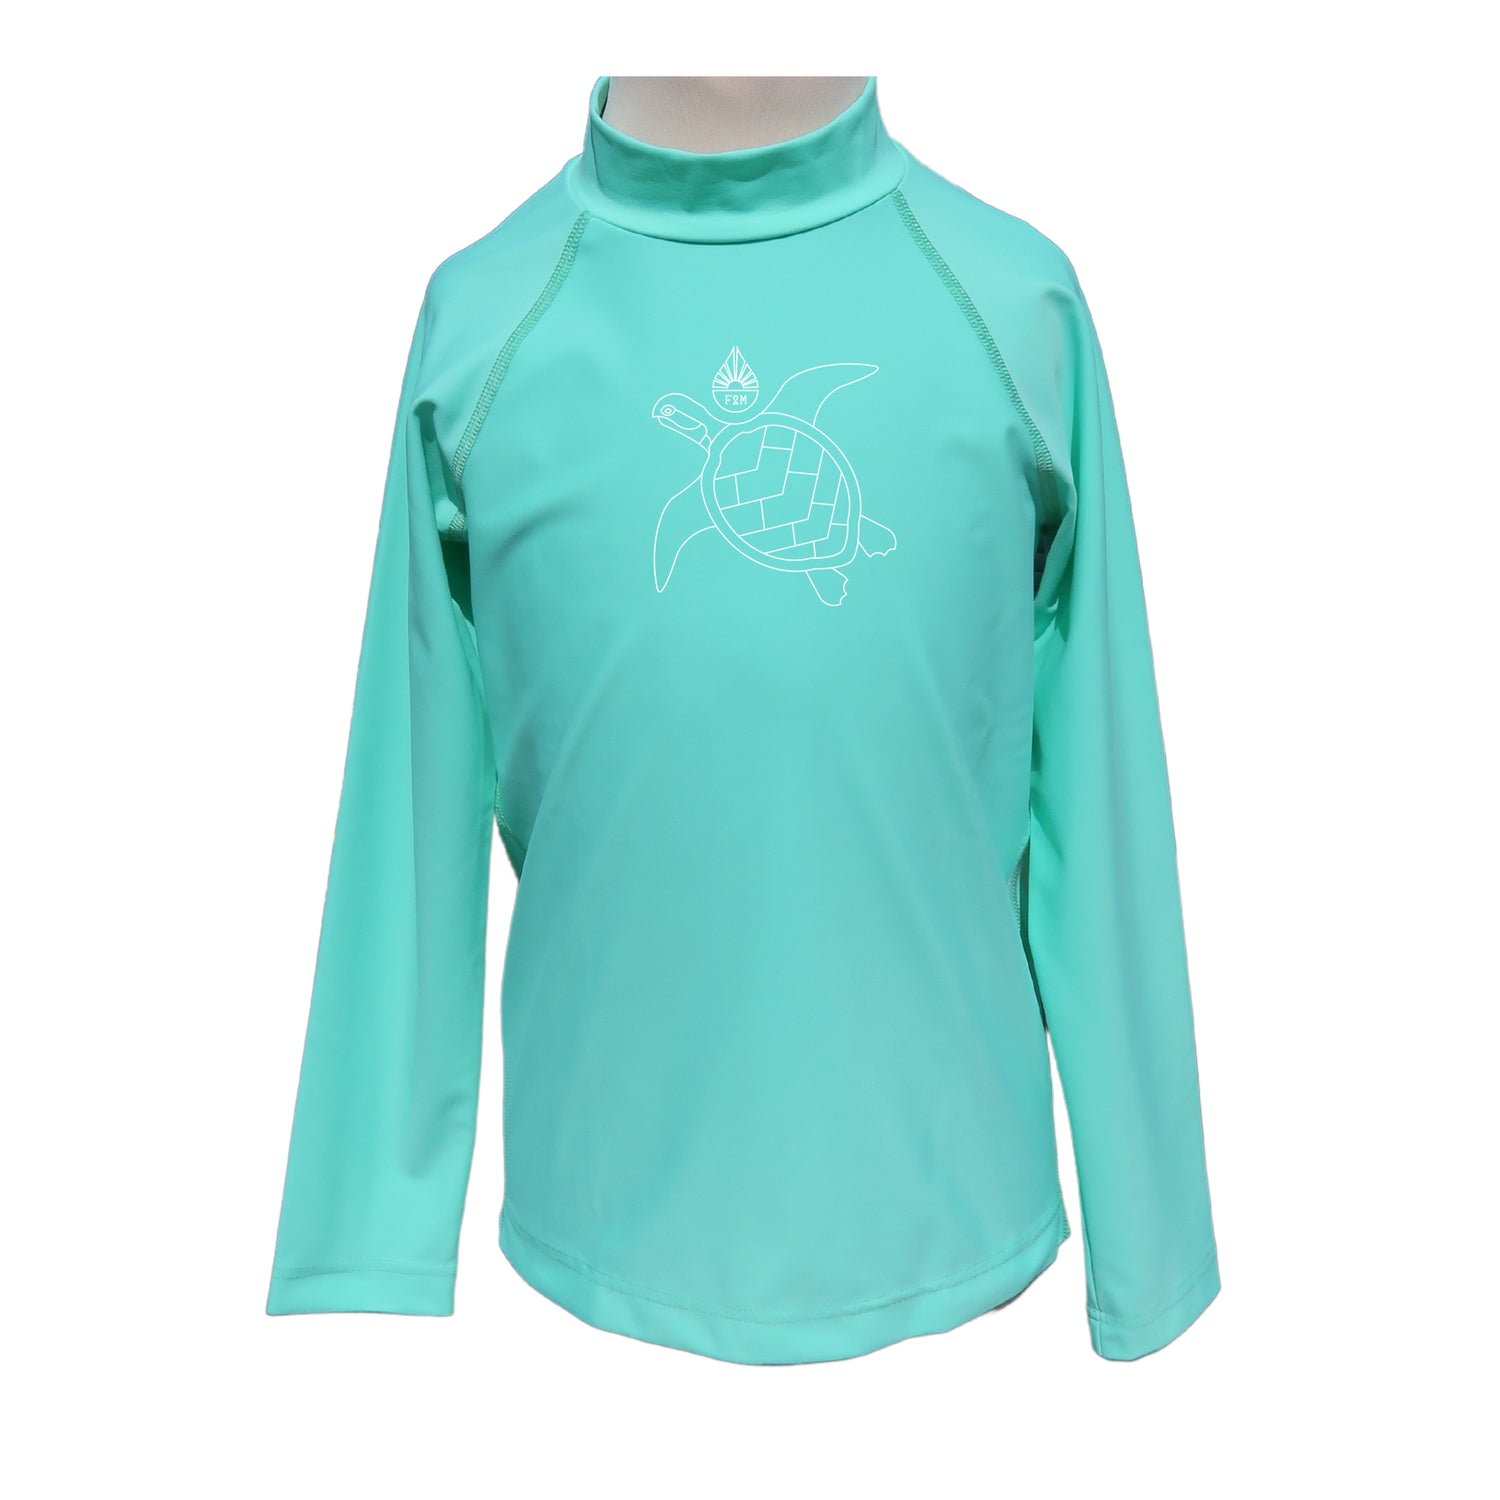 Lycra maillot top tee-shirt anti-uv enfant mixte upcyclé made in France UPF50+ tortue vert lagon